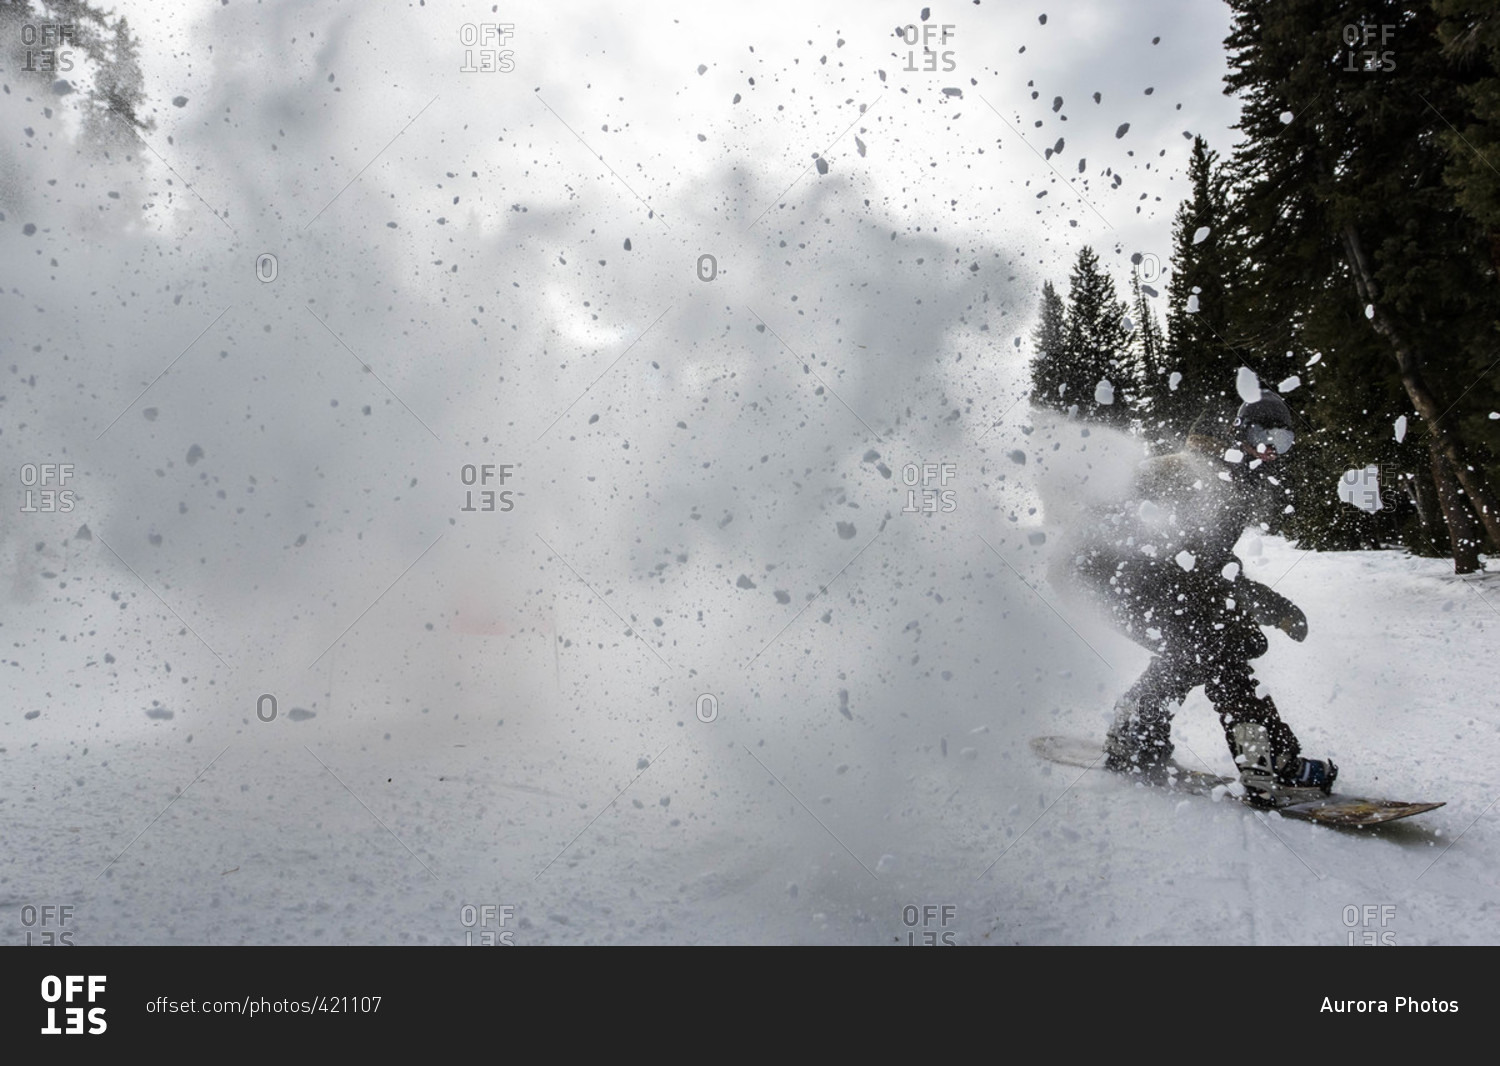 Snowboarder Sprays Snow Into The Air Riding A Groomed Trail During At Brighton Resort, Utah